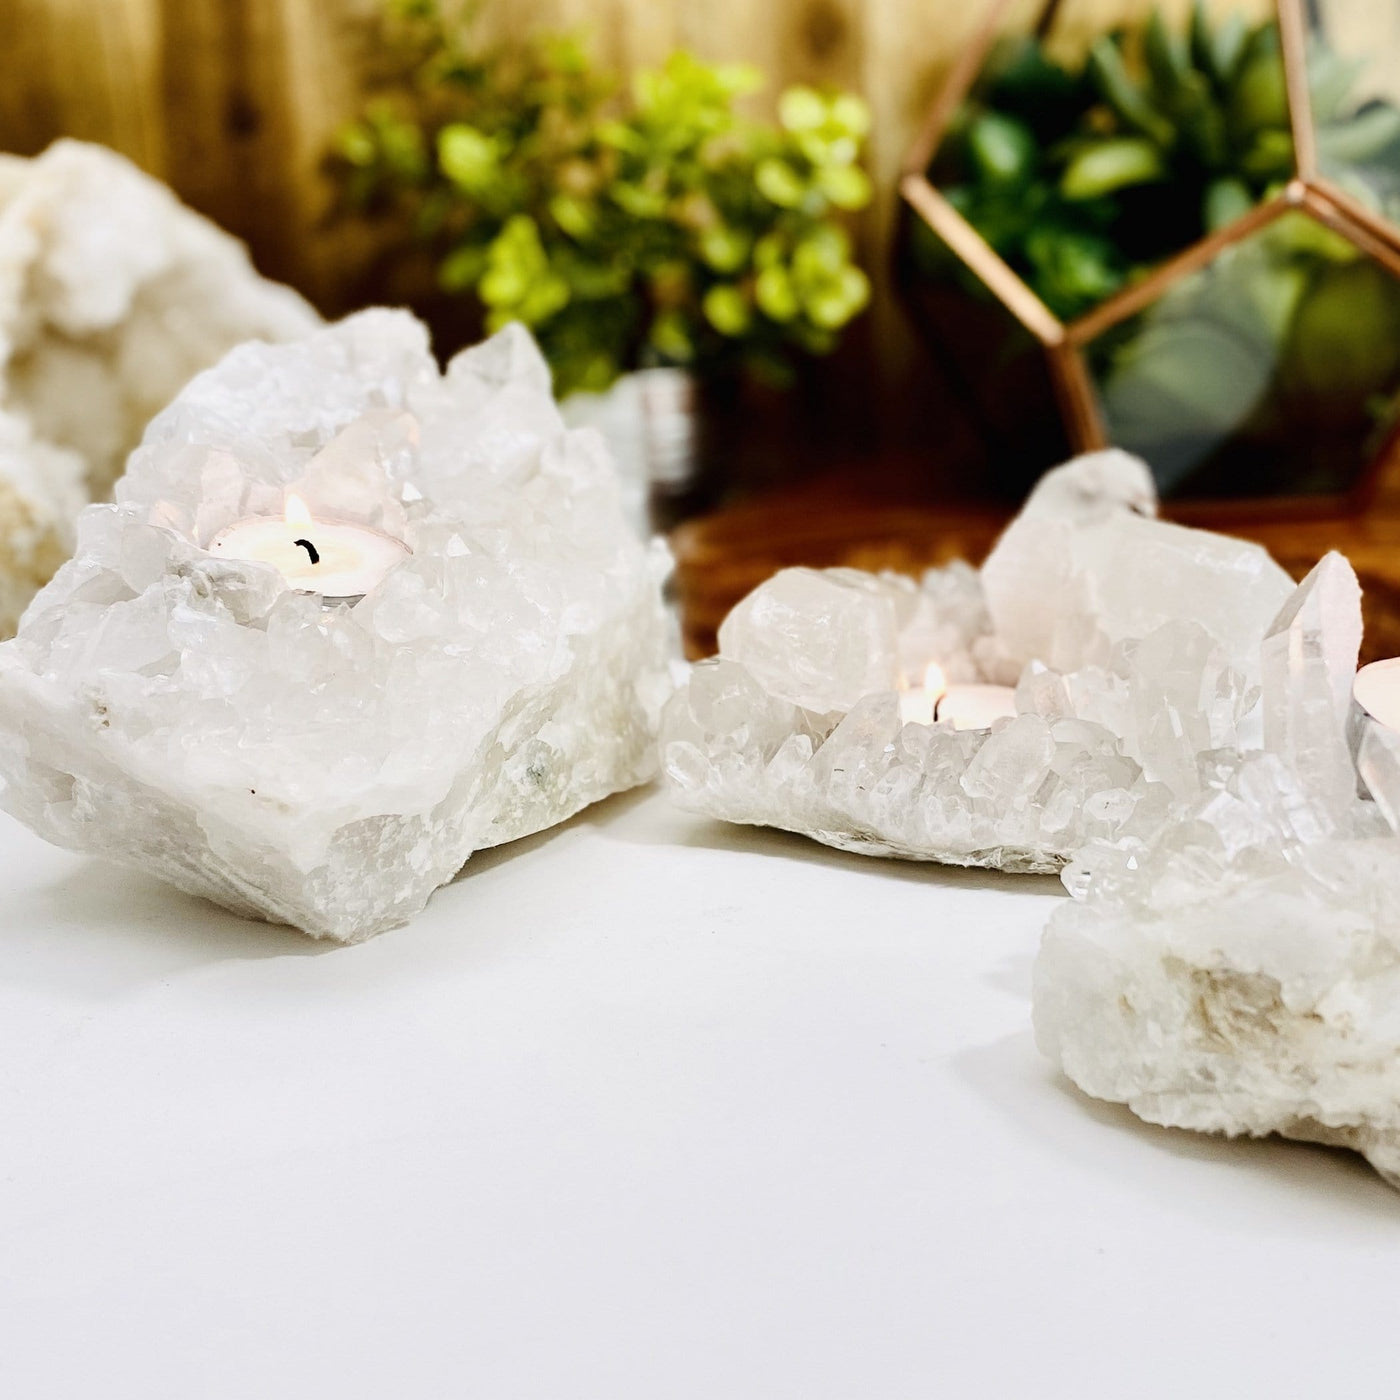 Crystal Quartz Cluster Candle Holder view from side